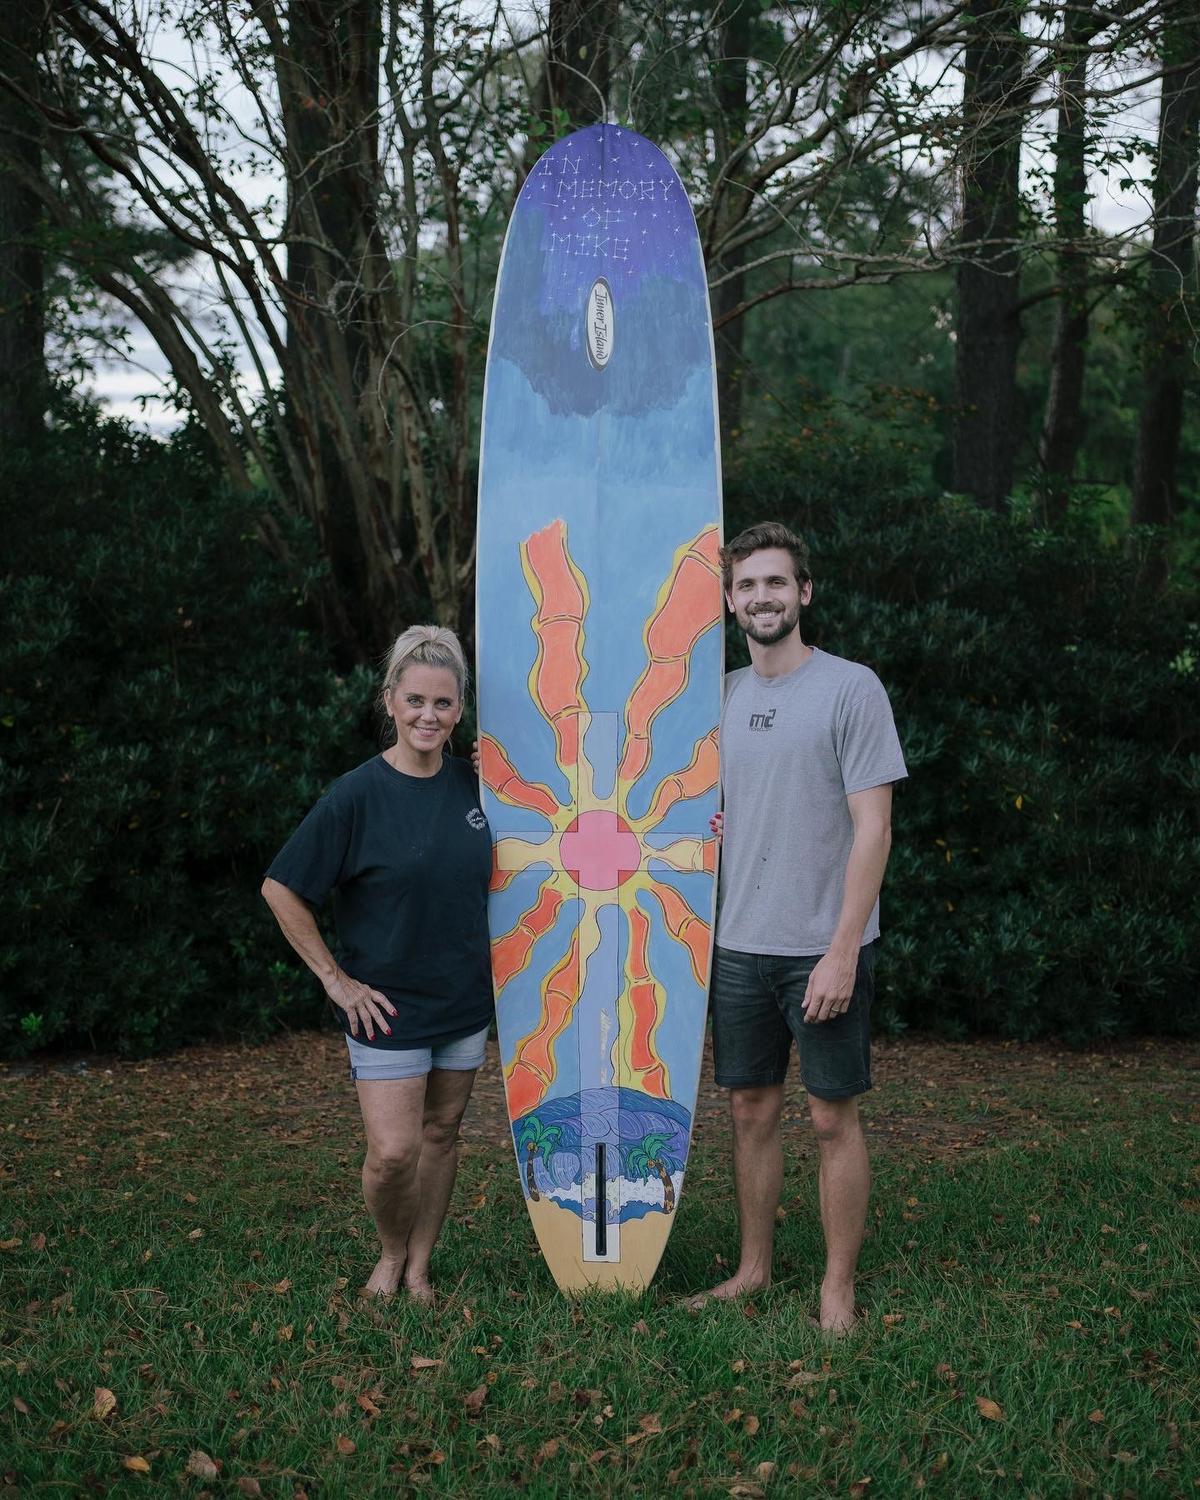 Troy and Robin with the special surfboard painted in memory of Mikell, which the family had lost in 2016 and Troy tracked down in 2020. (Courtesy of <a href="https://www.instagram.com/troybedenbaugh/">Troy Bedenbaugh</a>)